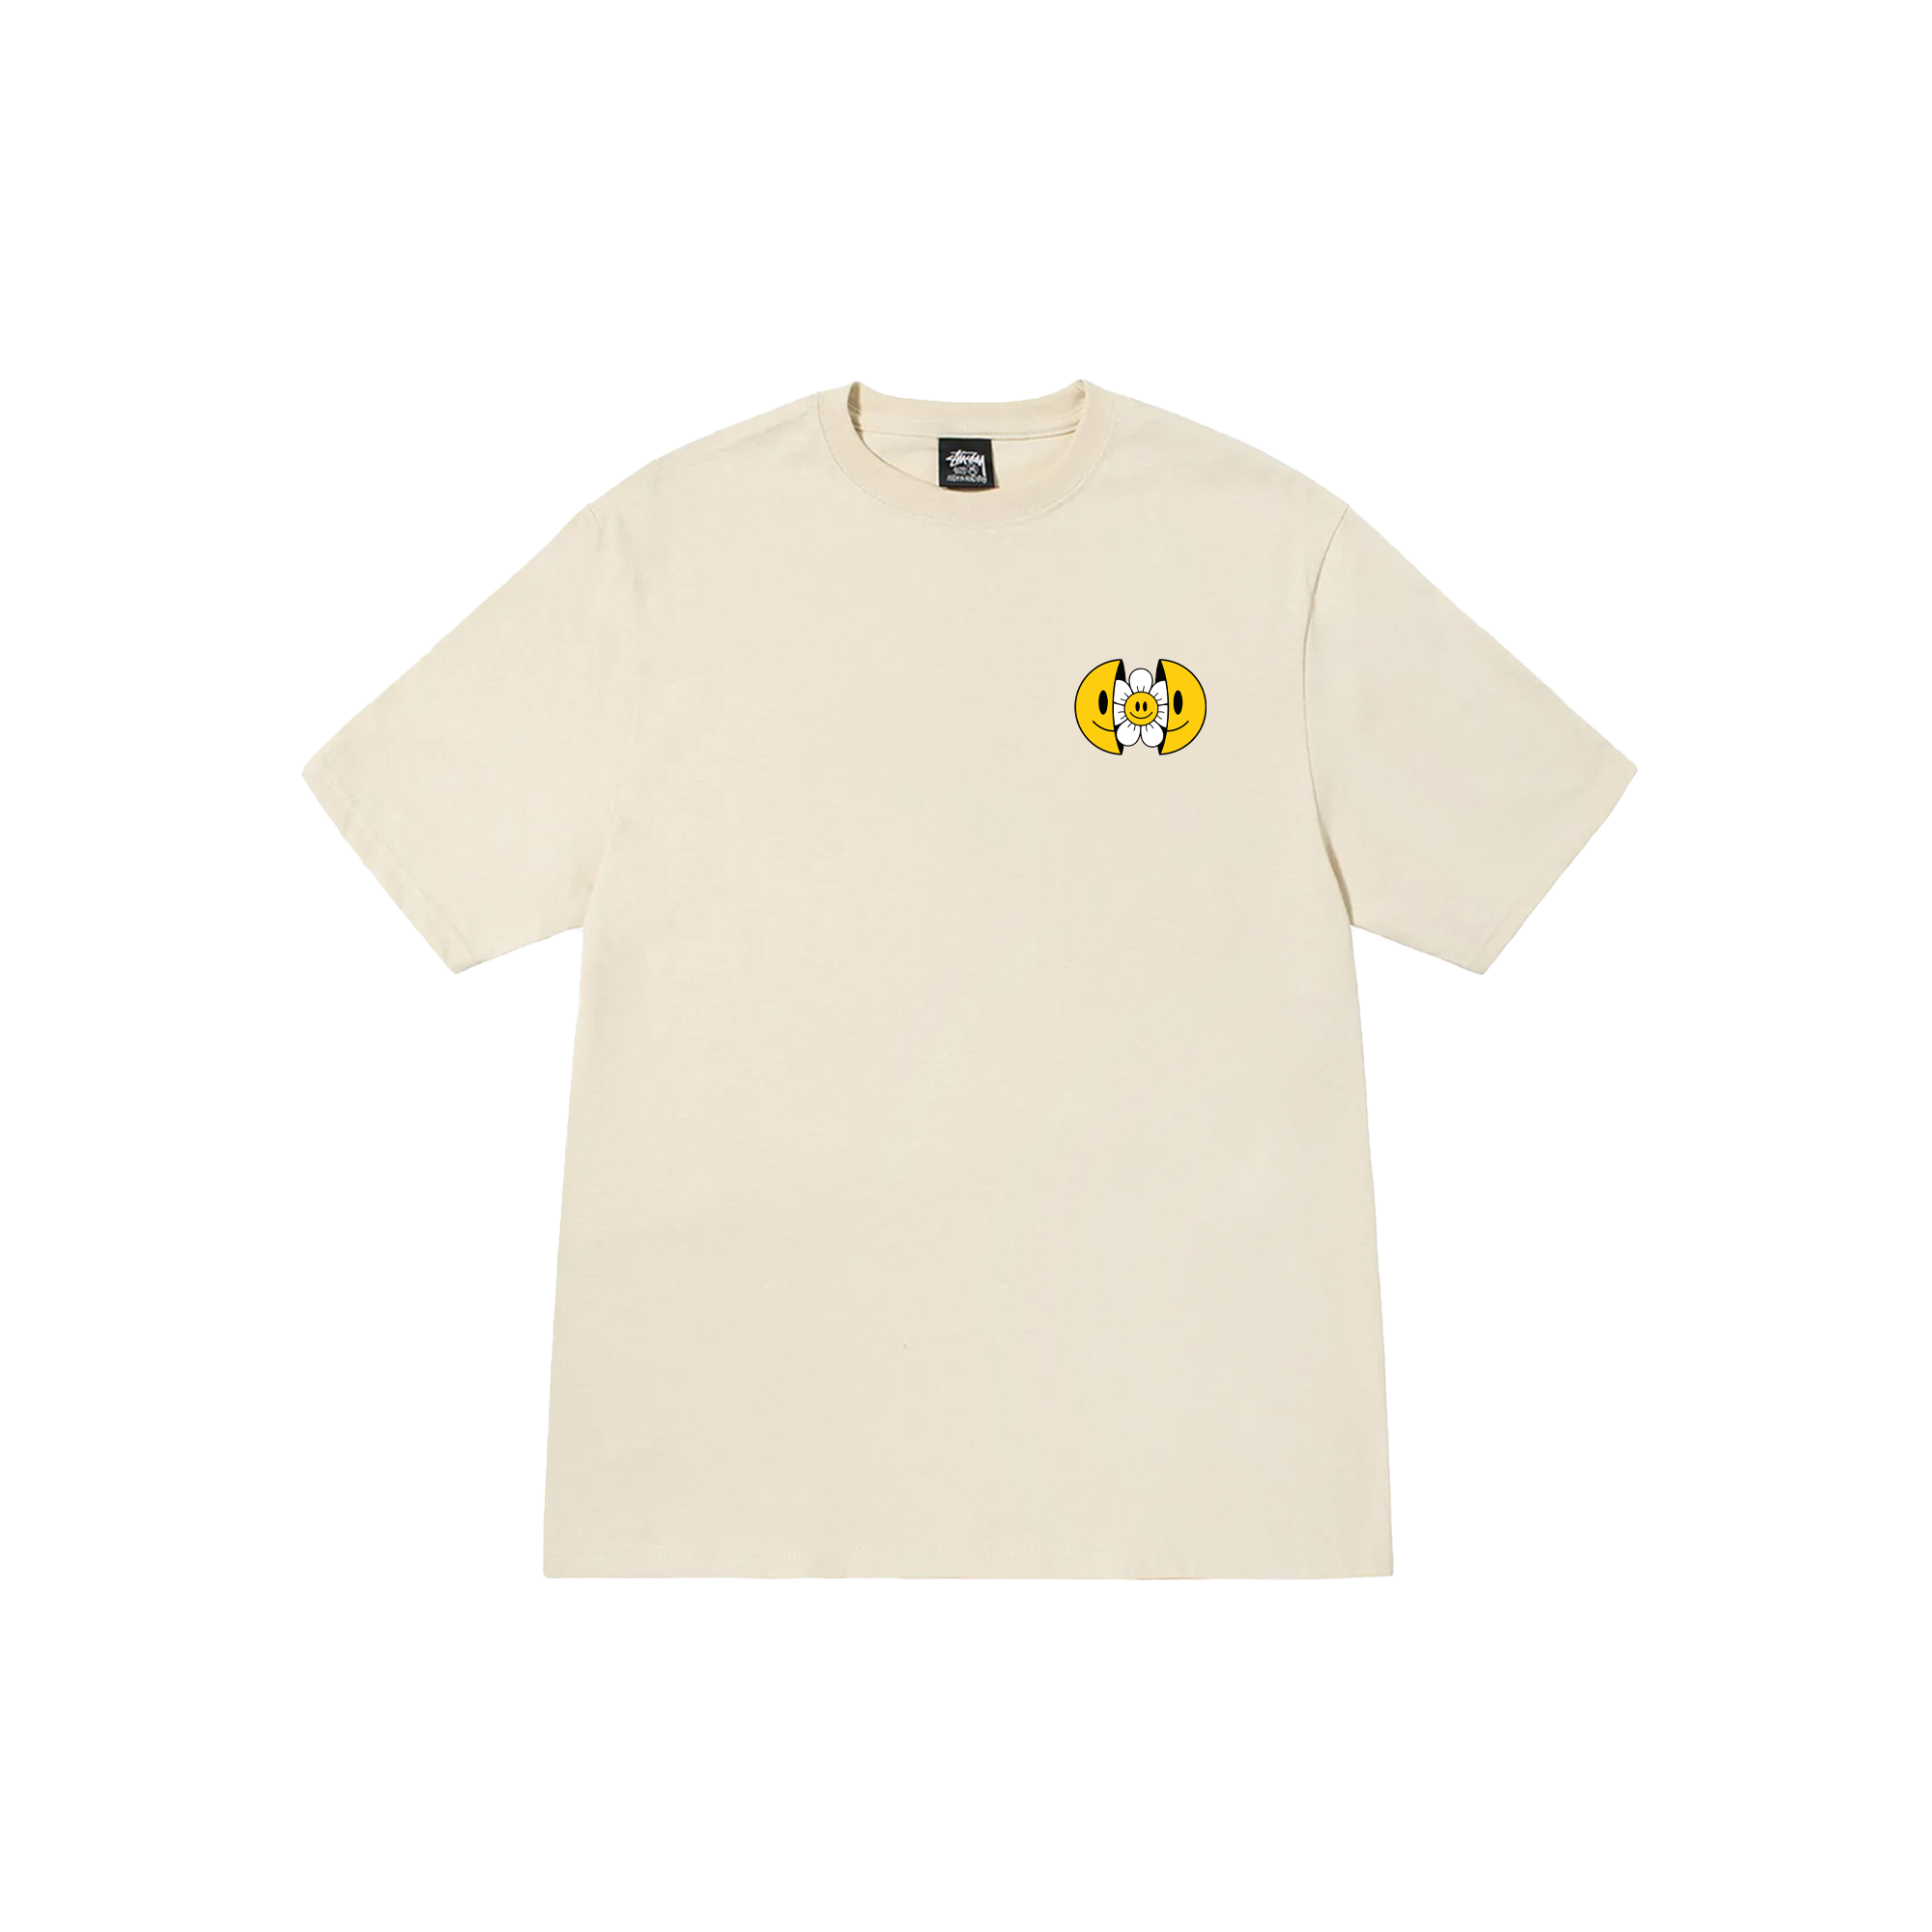 Stussy Floral Smiling Face T-Shirt